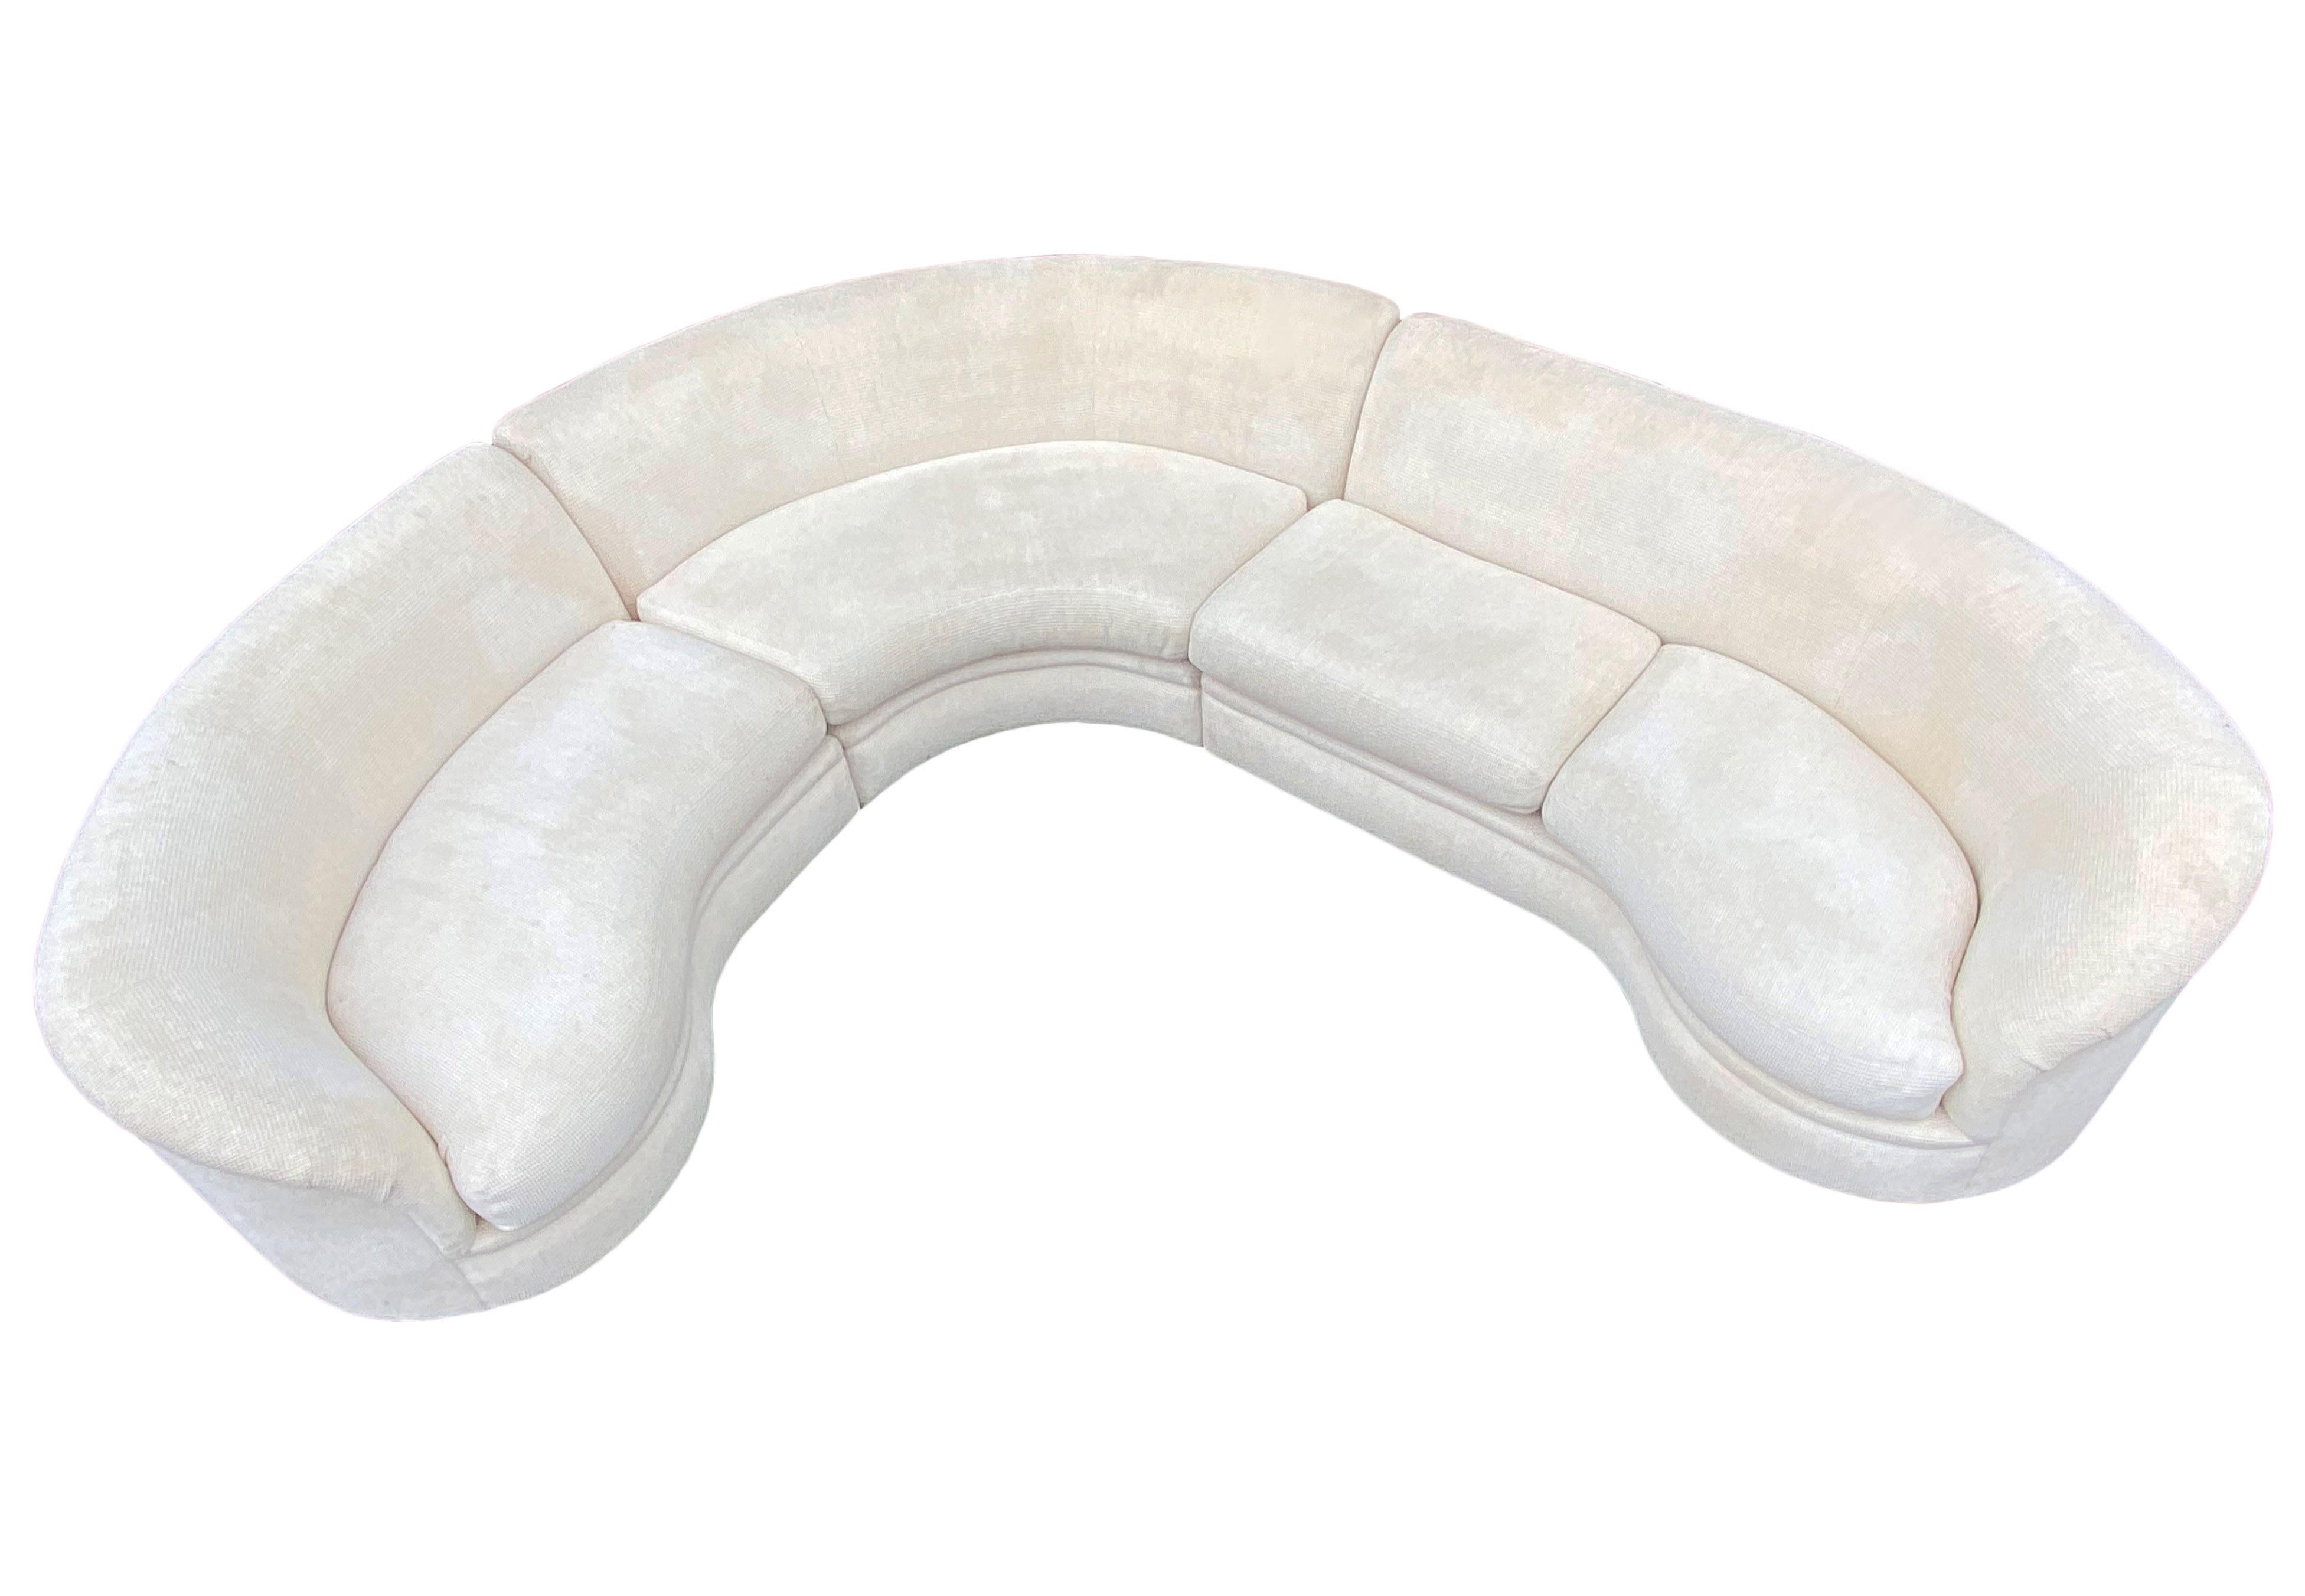 Late 20th Century Mid-Century Modern Curved & Sculptural Sectional Serpentine Sofa by Directional